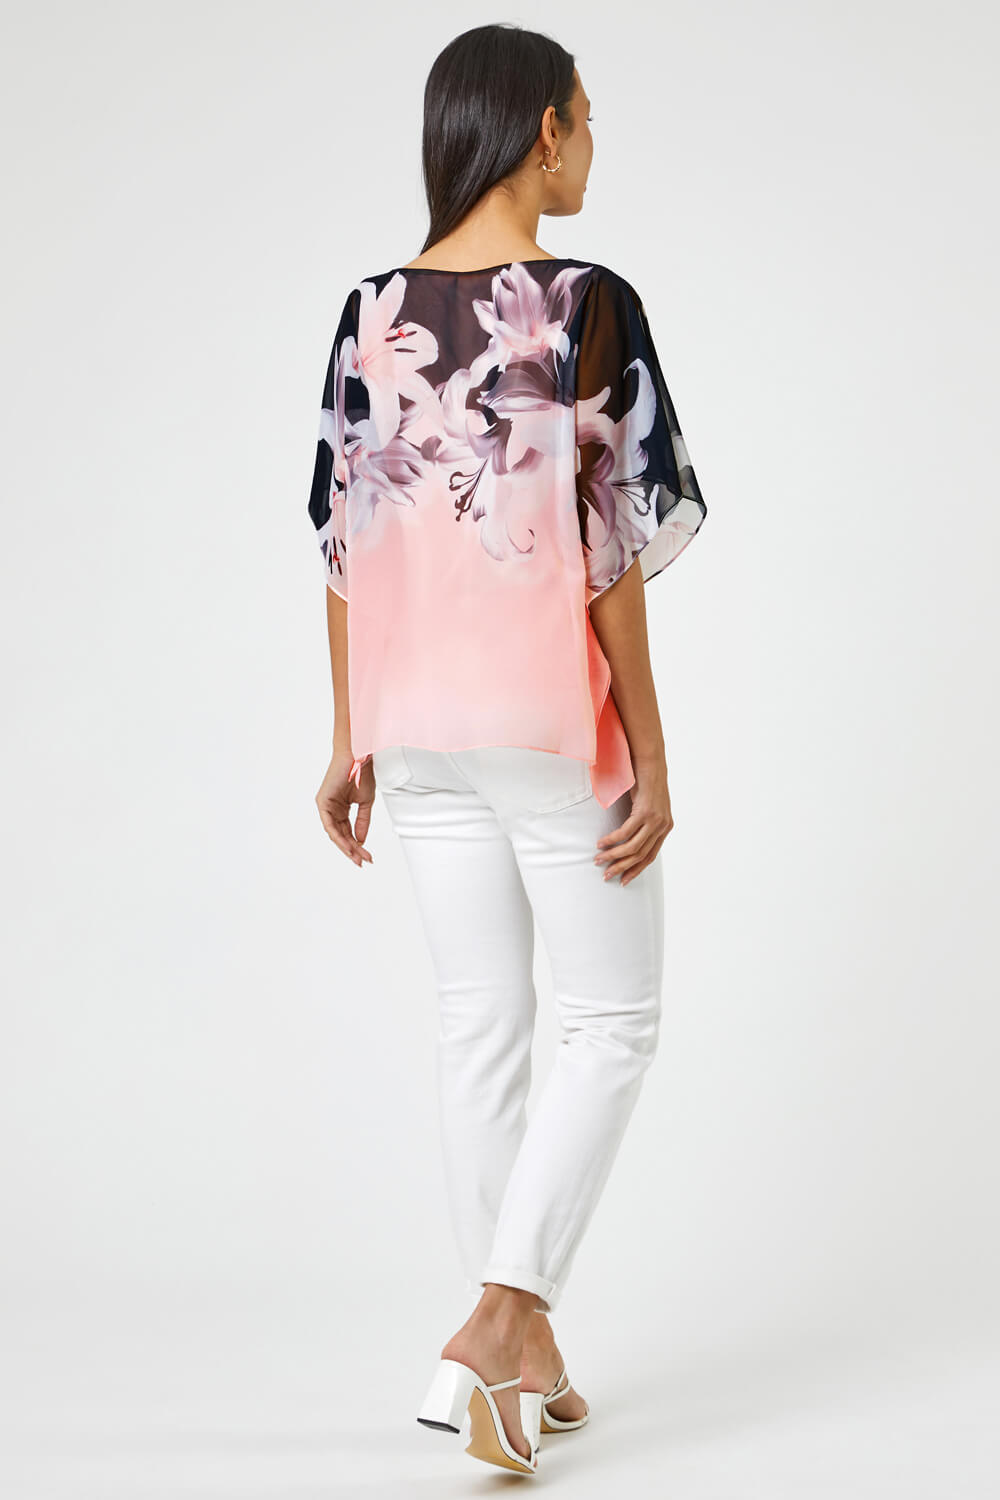 Light Pink Floral Border Print Overlay Top, Image 2 of 4